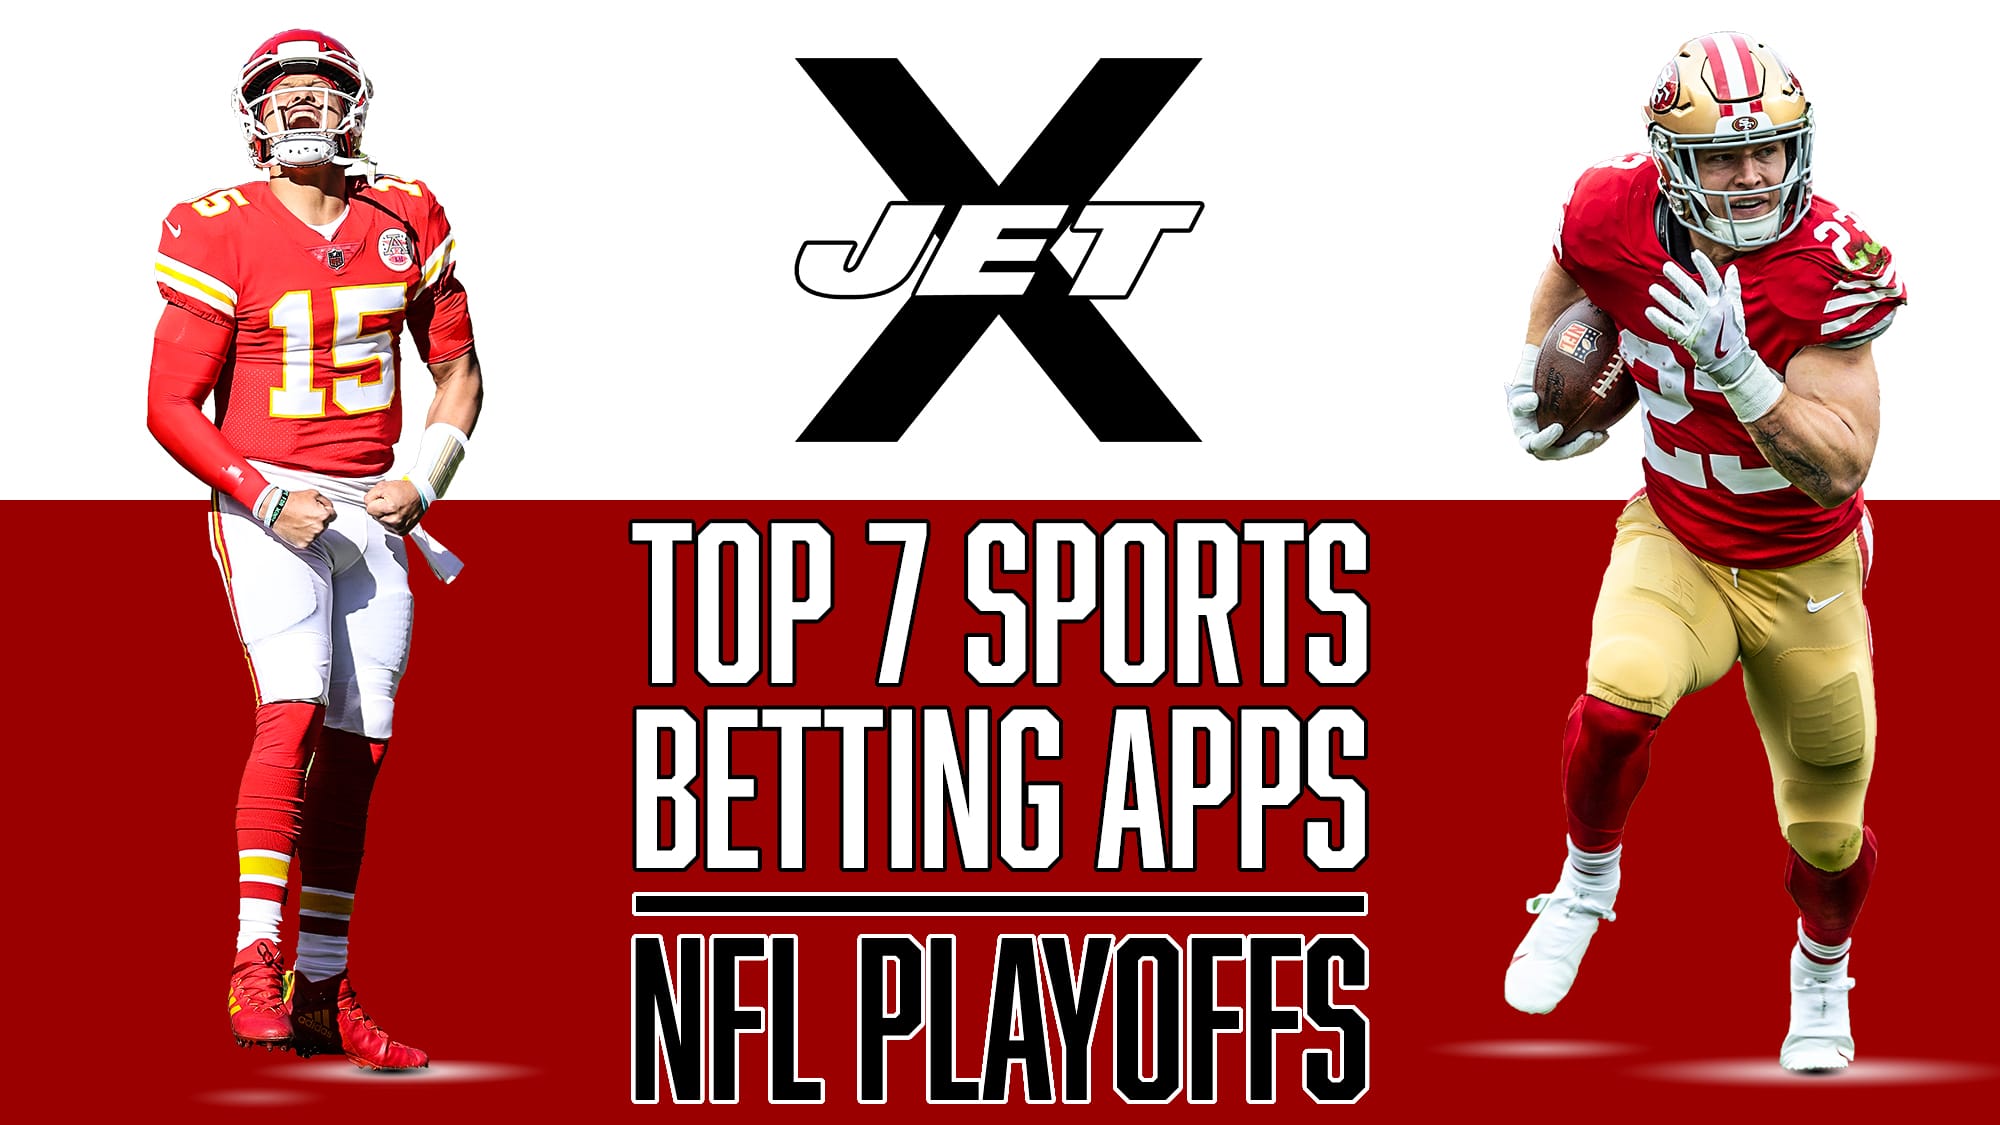 Top 7 Sports Betting Apps and Sportsbook Promos for NFL Playoffs